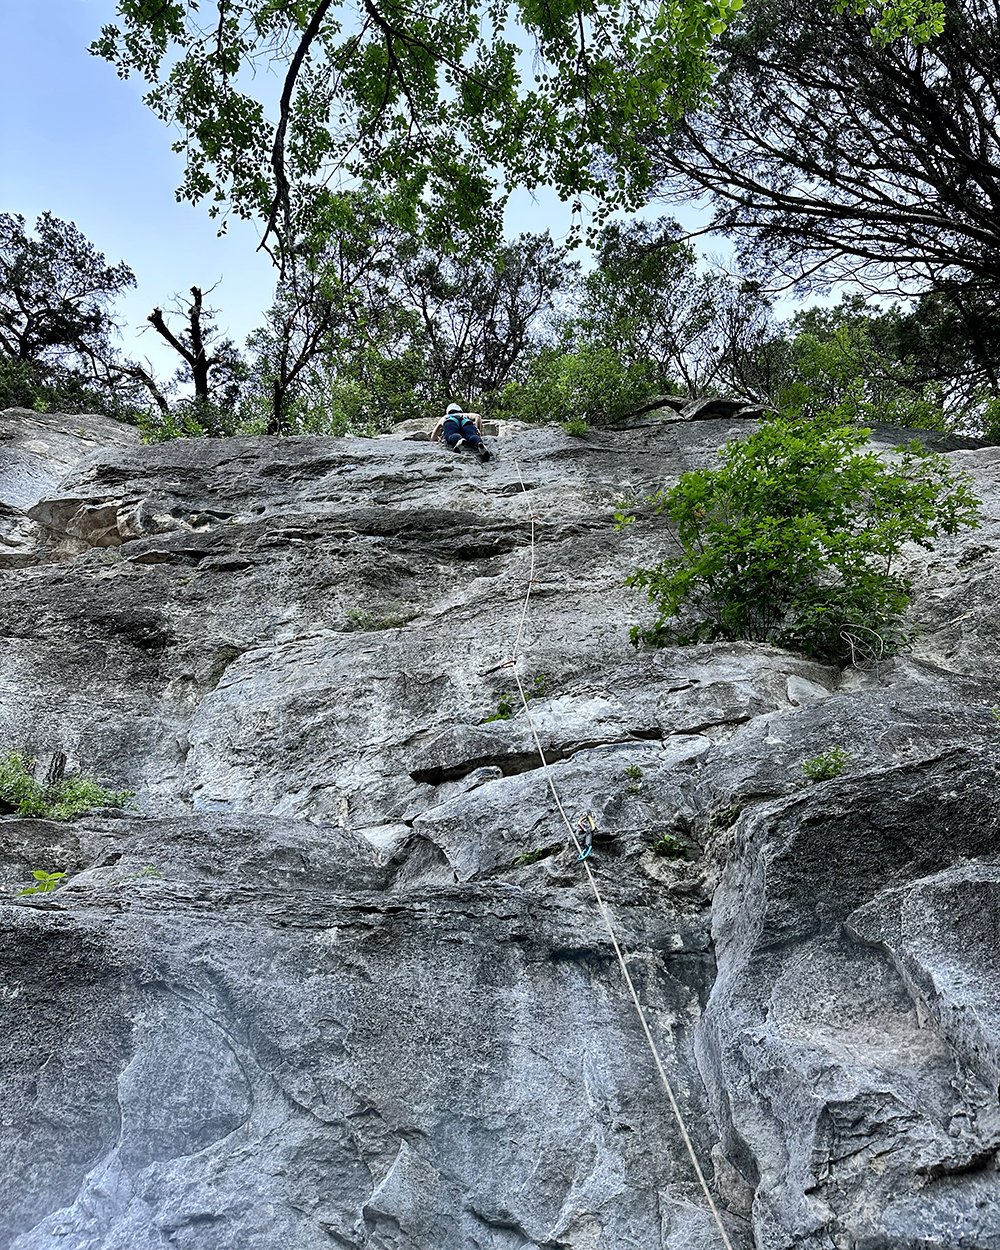  Leading Trojan 5.9, figuring out the crux at the top. 